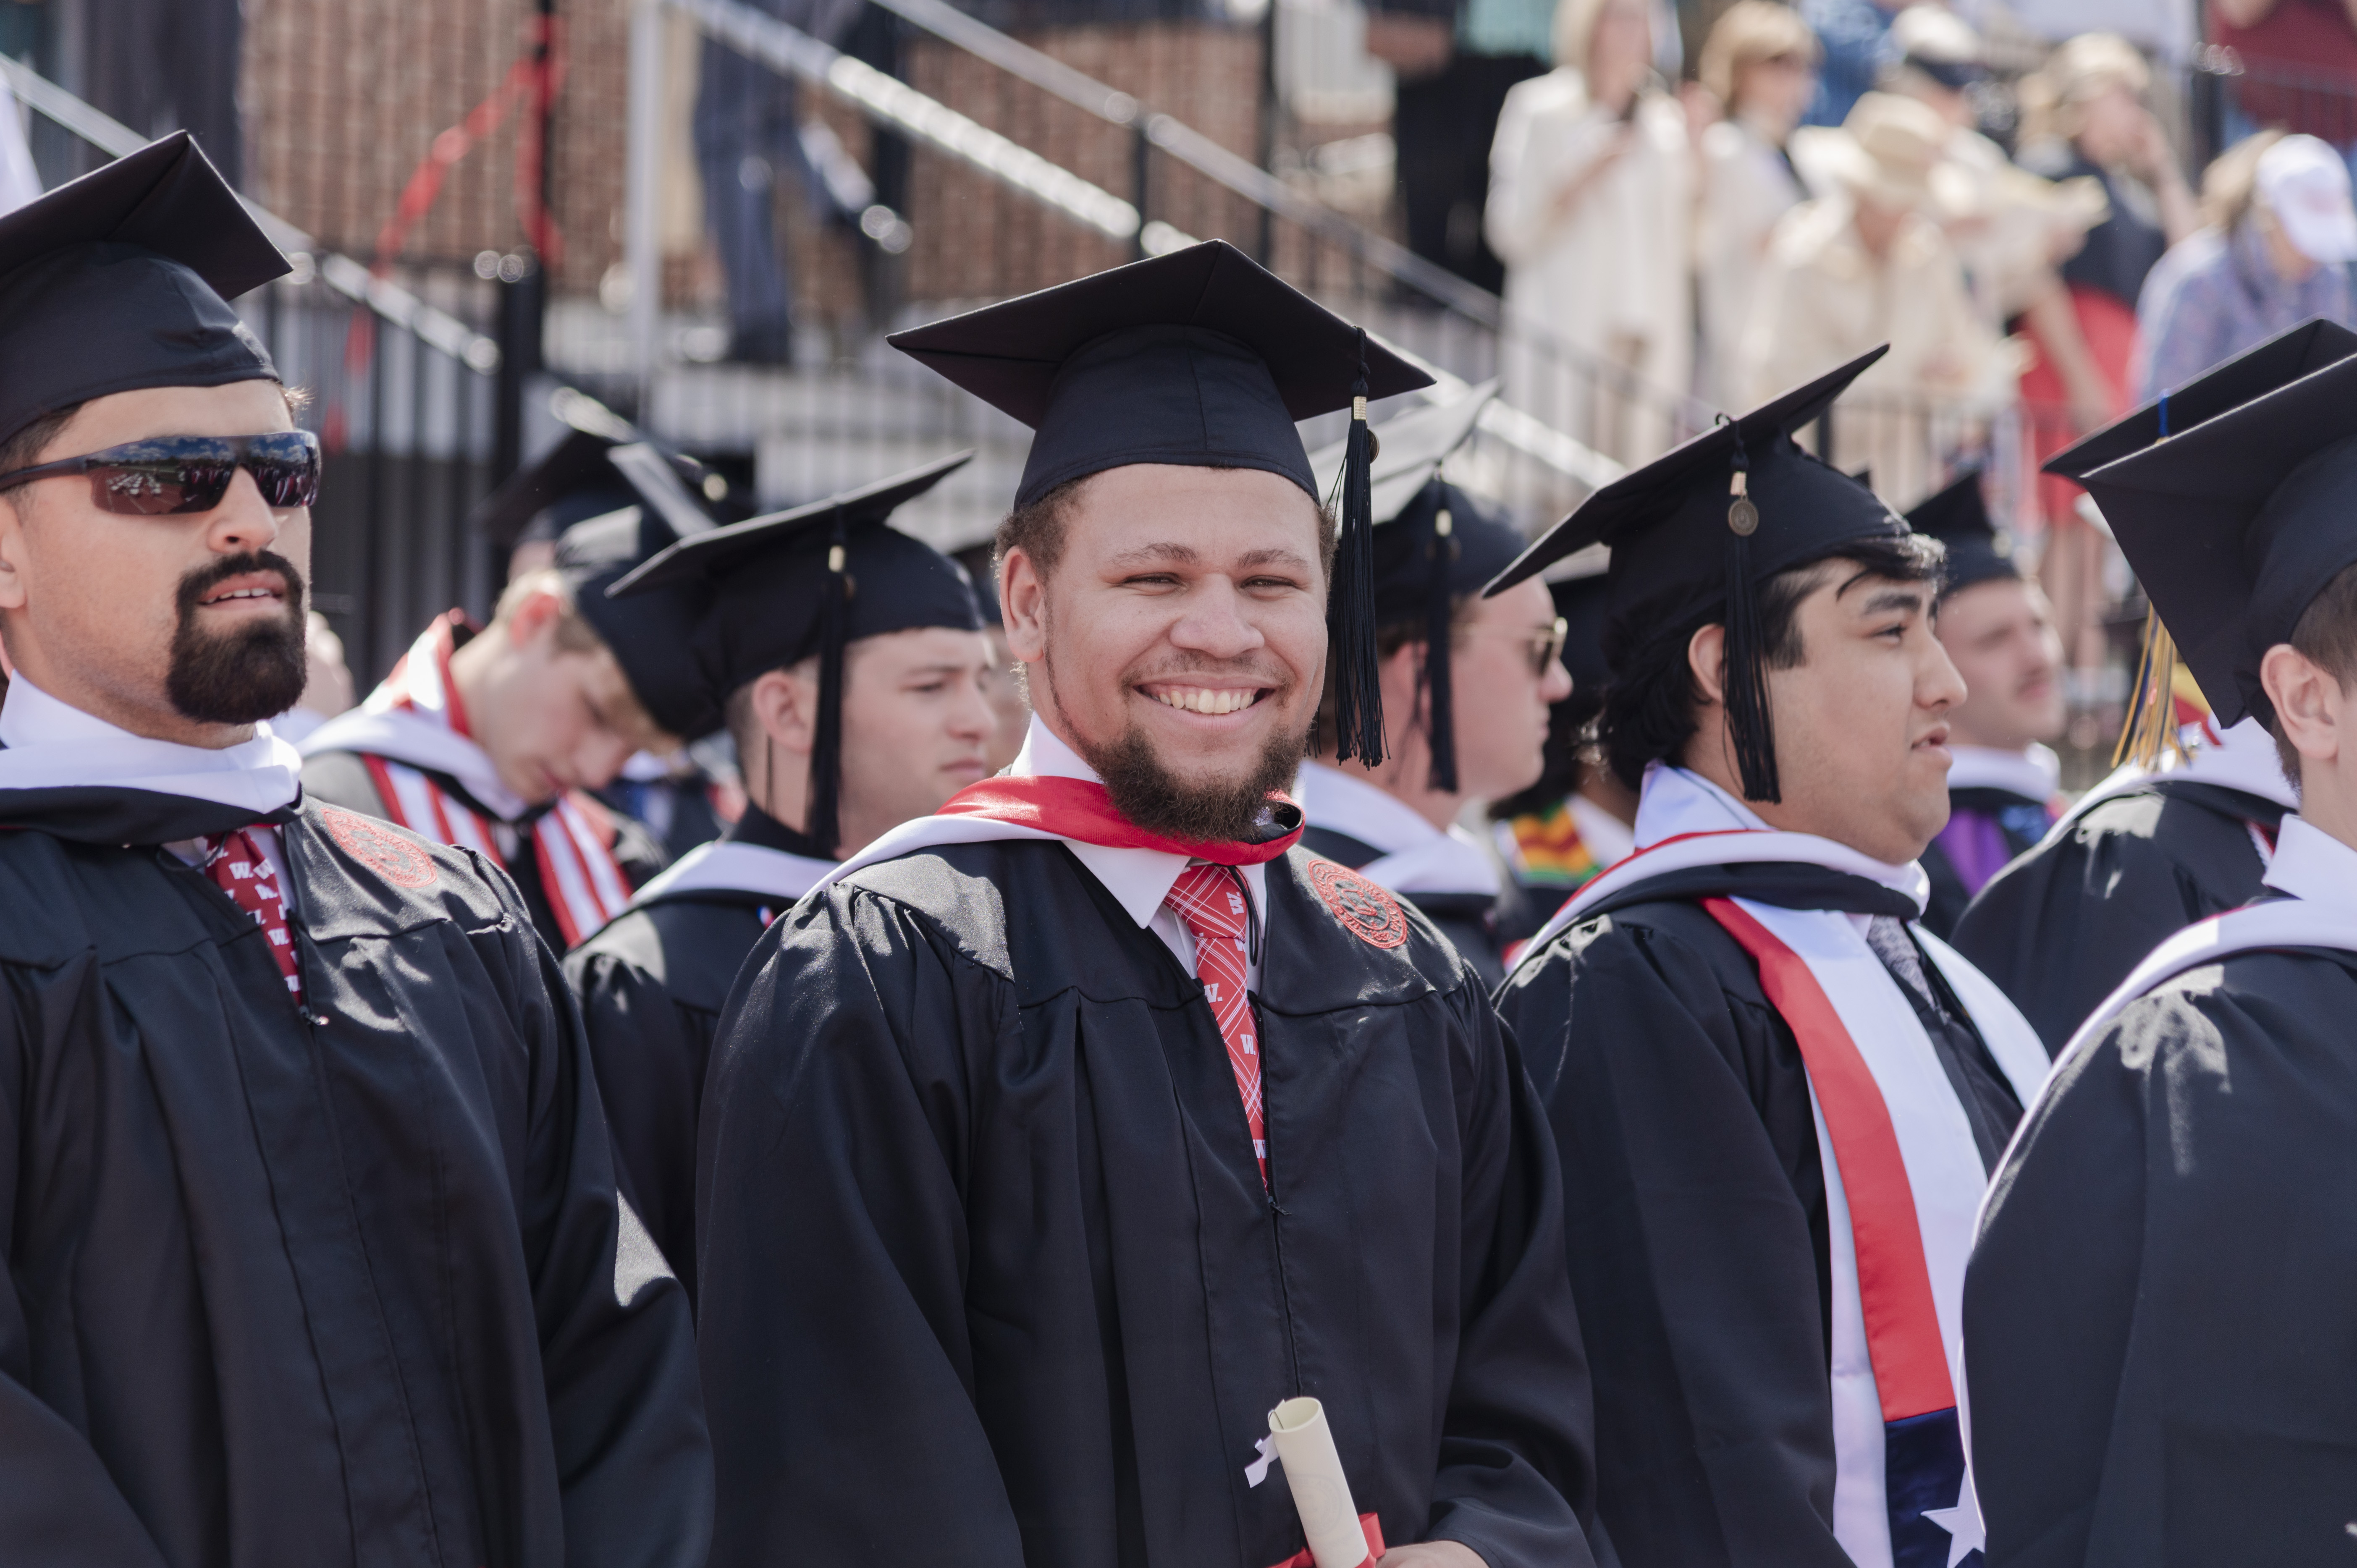 There were lots of smiles in Little Giant Stadium during Wabash College's 186th Commencement Ceremony.